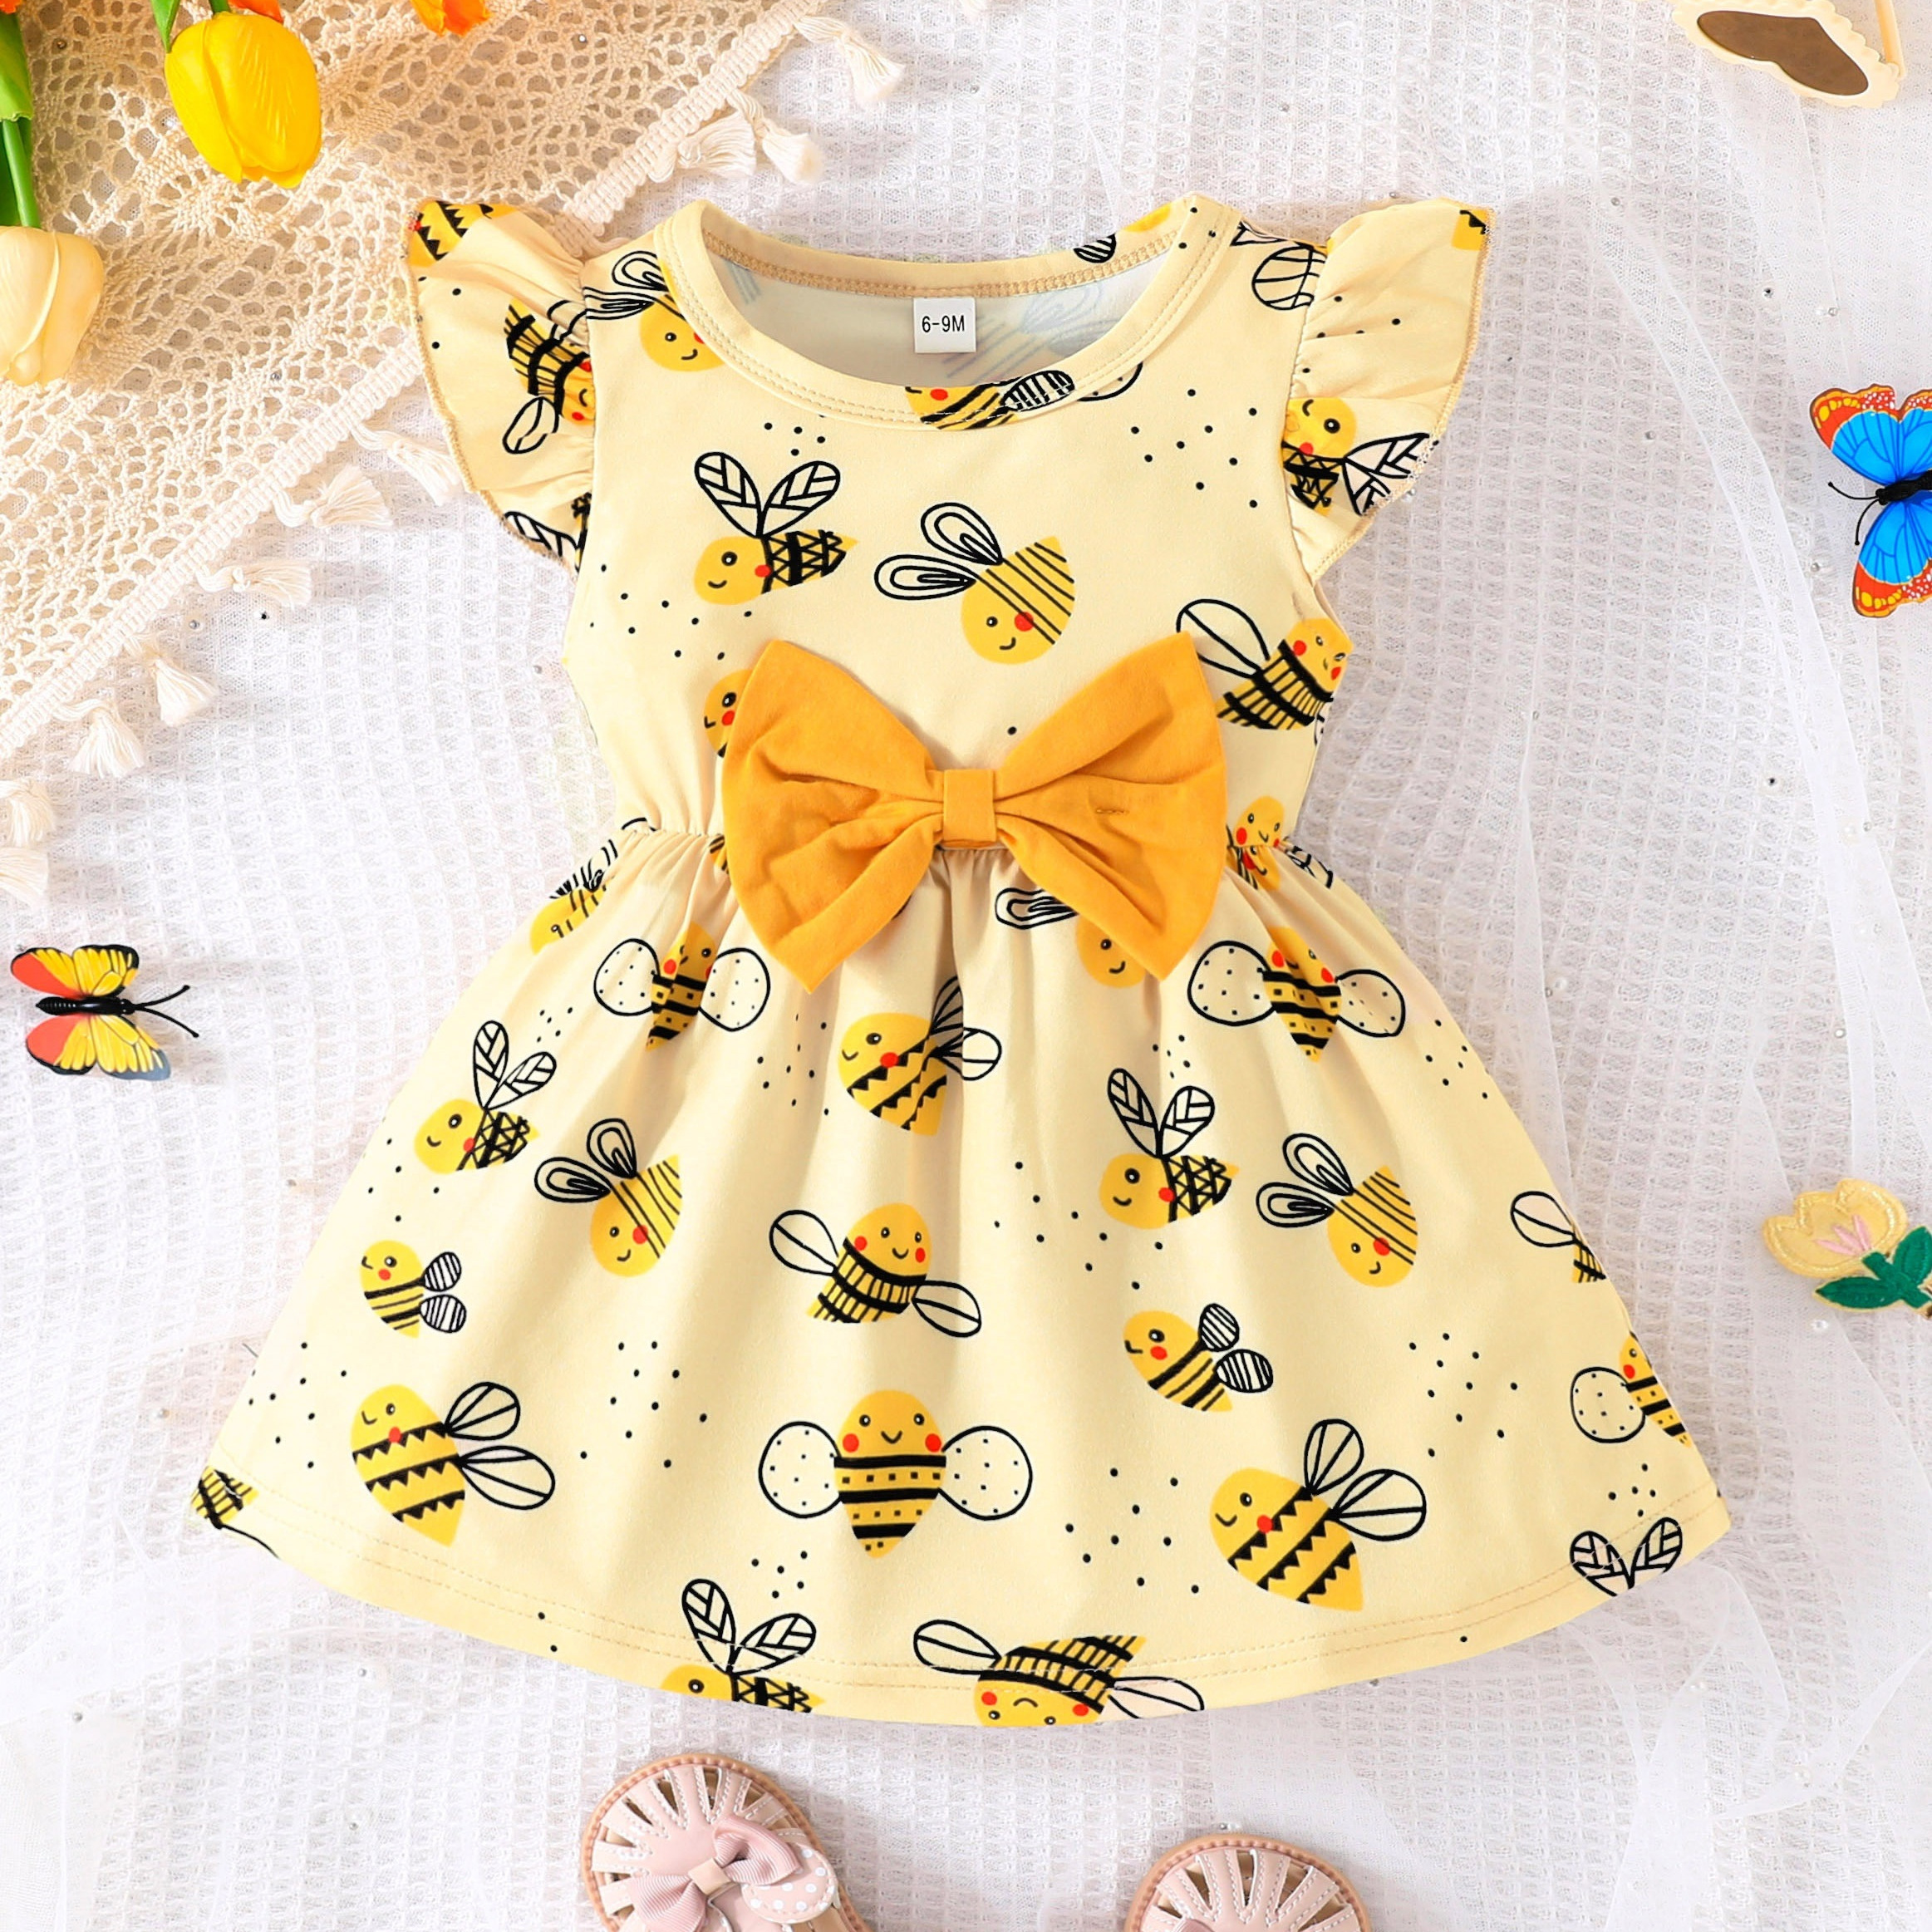 

Infant & Toddler's Cartoon Bee All-over Print Dress, Bowknot Decor Cap Sleeve Dress, Baby Girl's Clothing For Summer